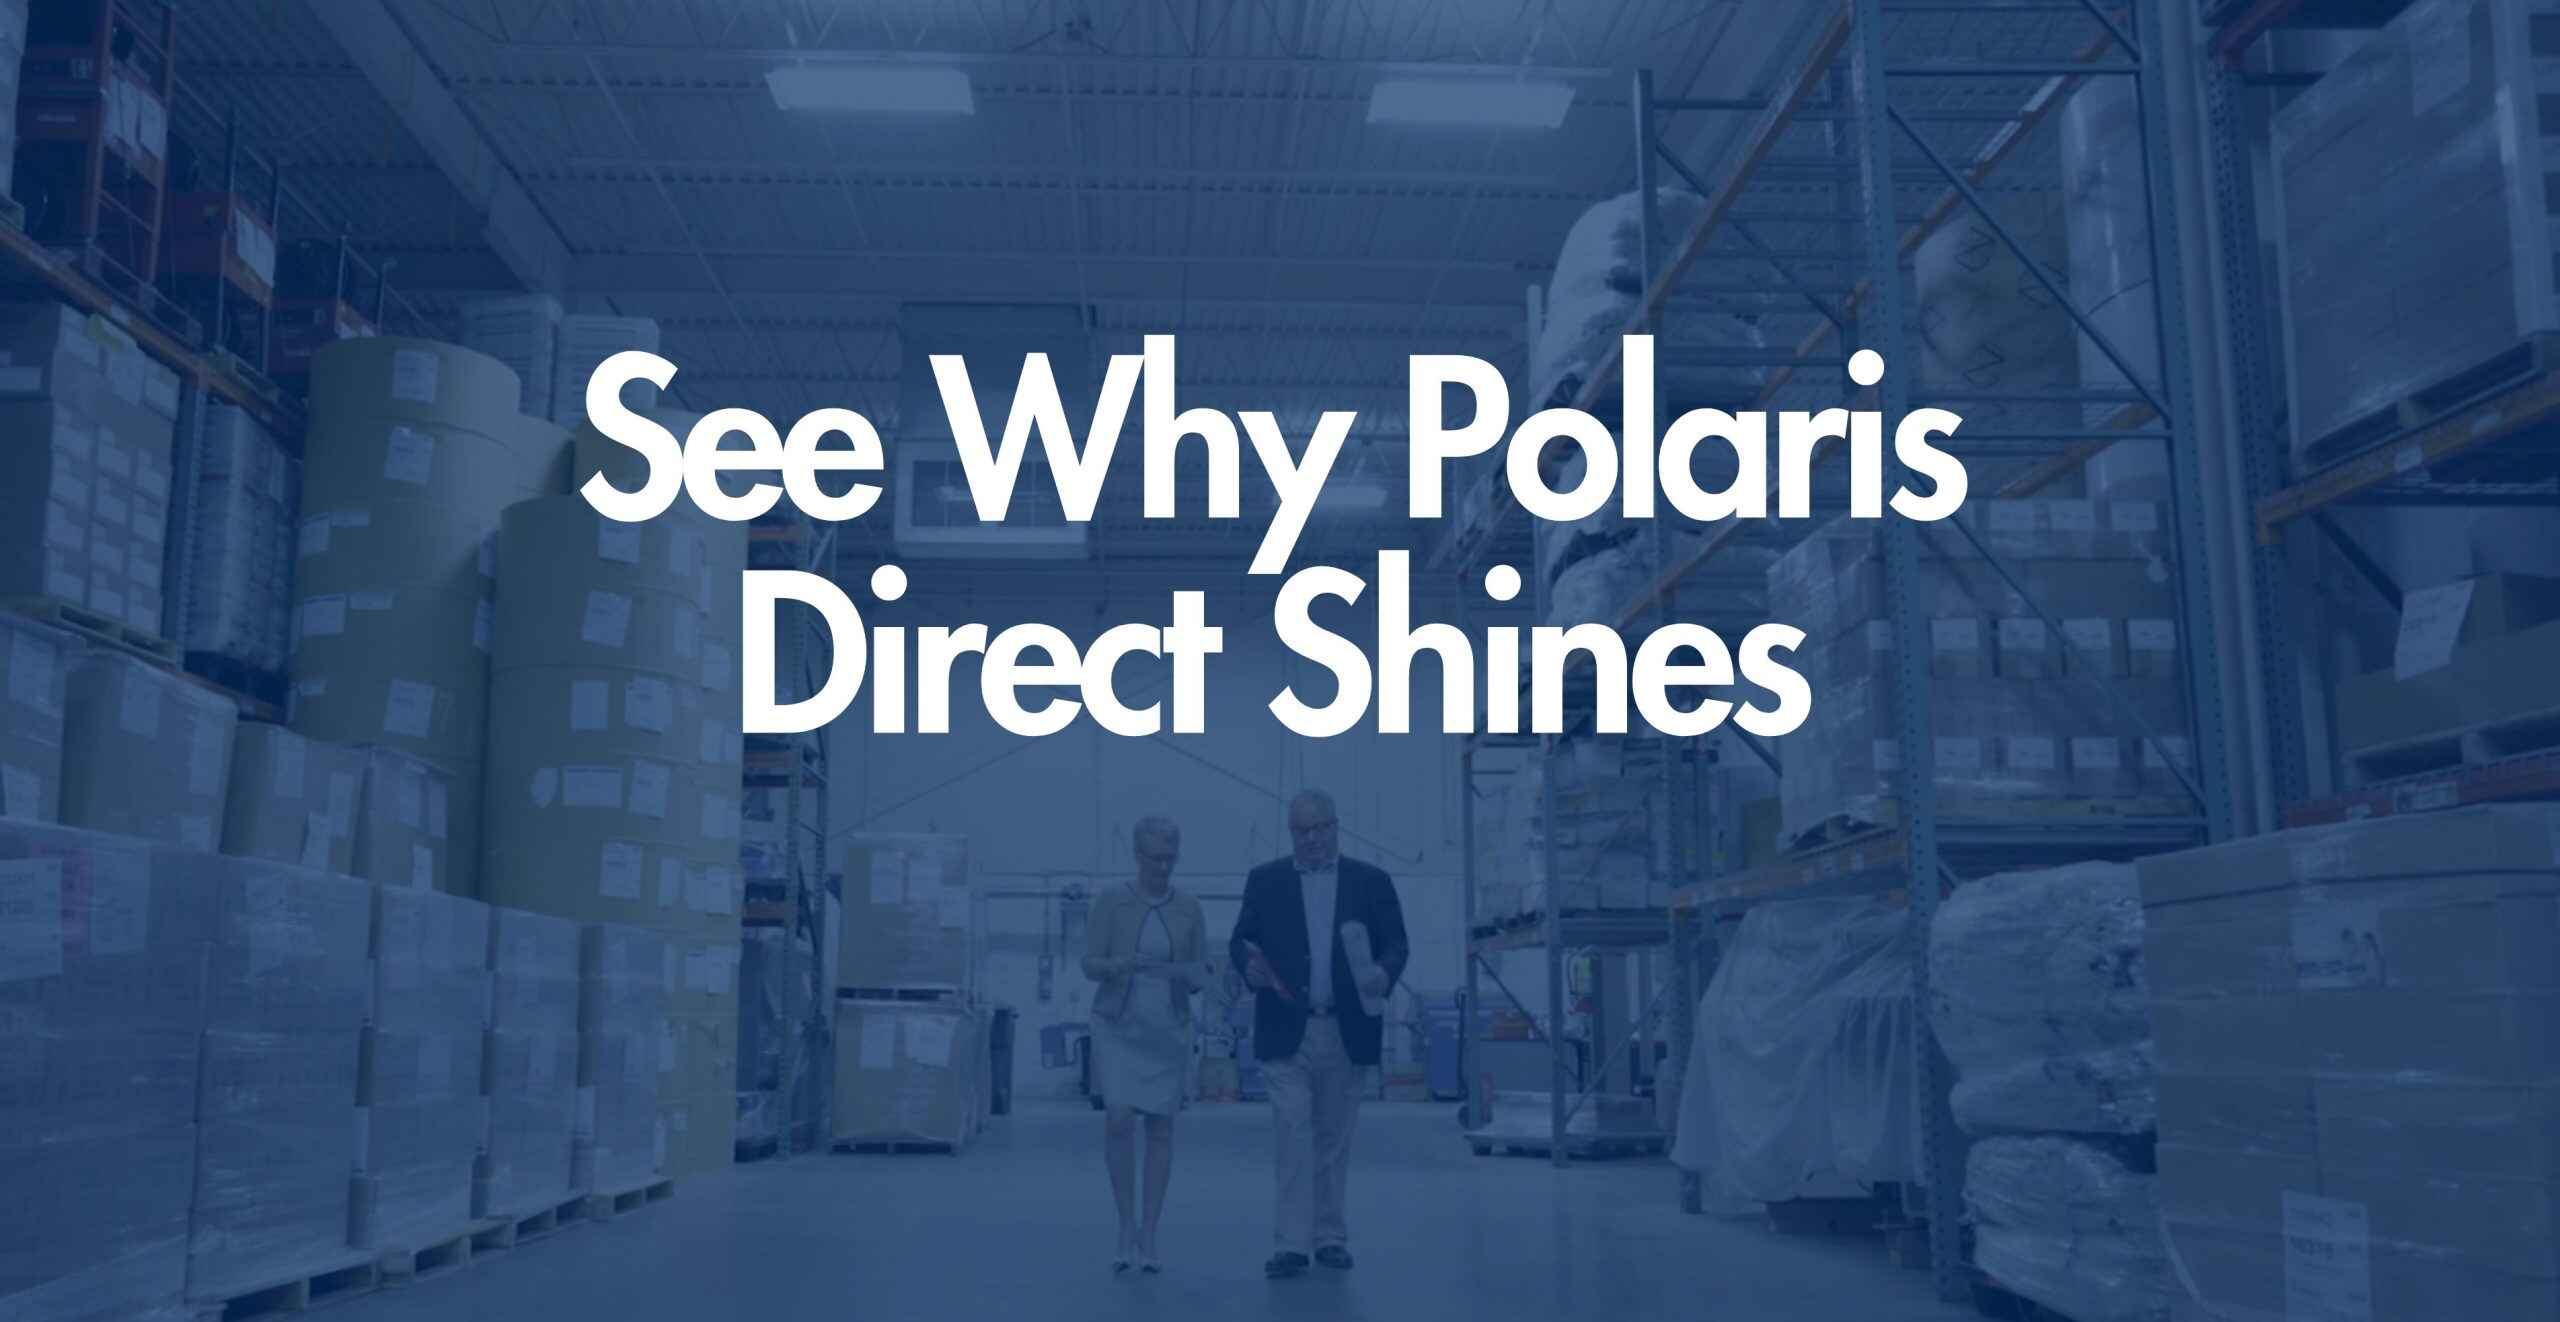 see why polaris direct shines video